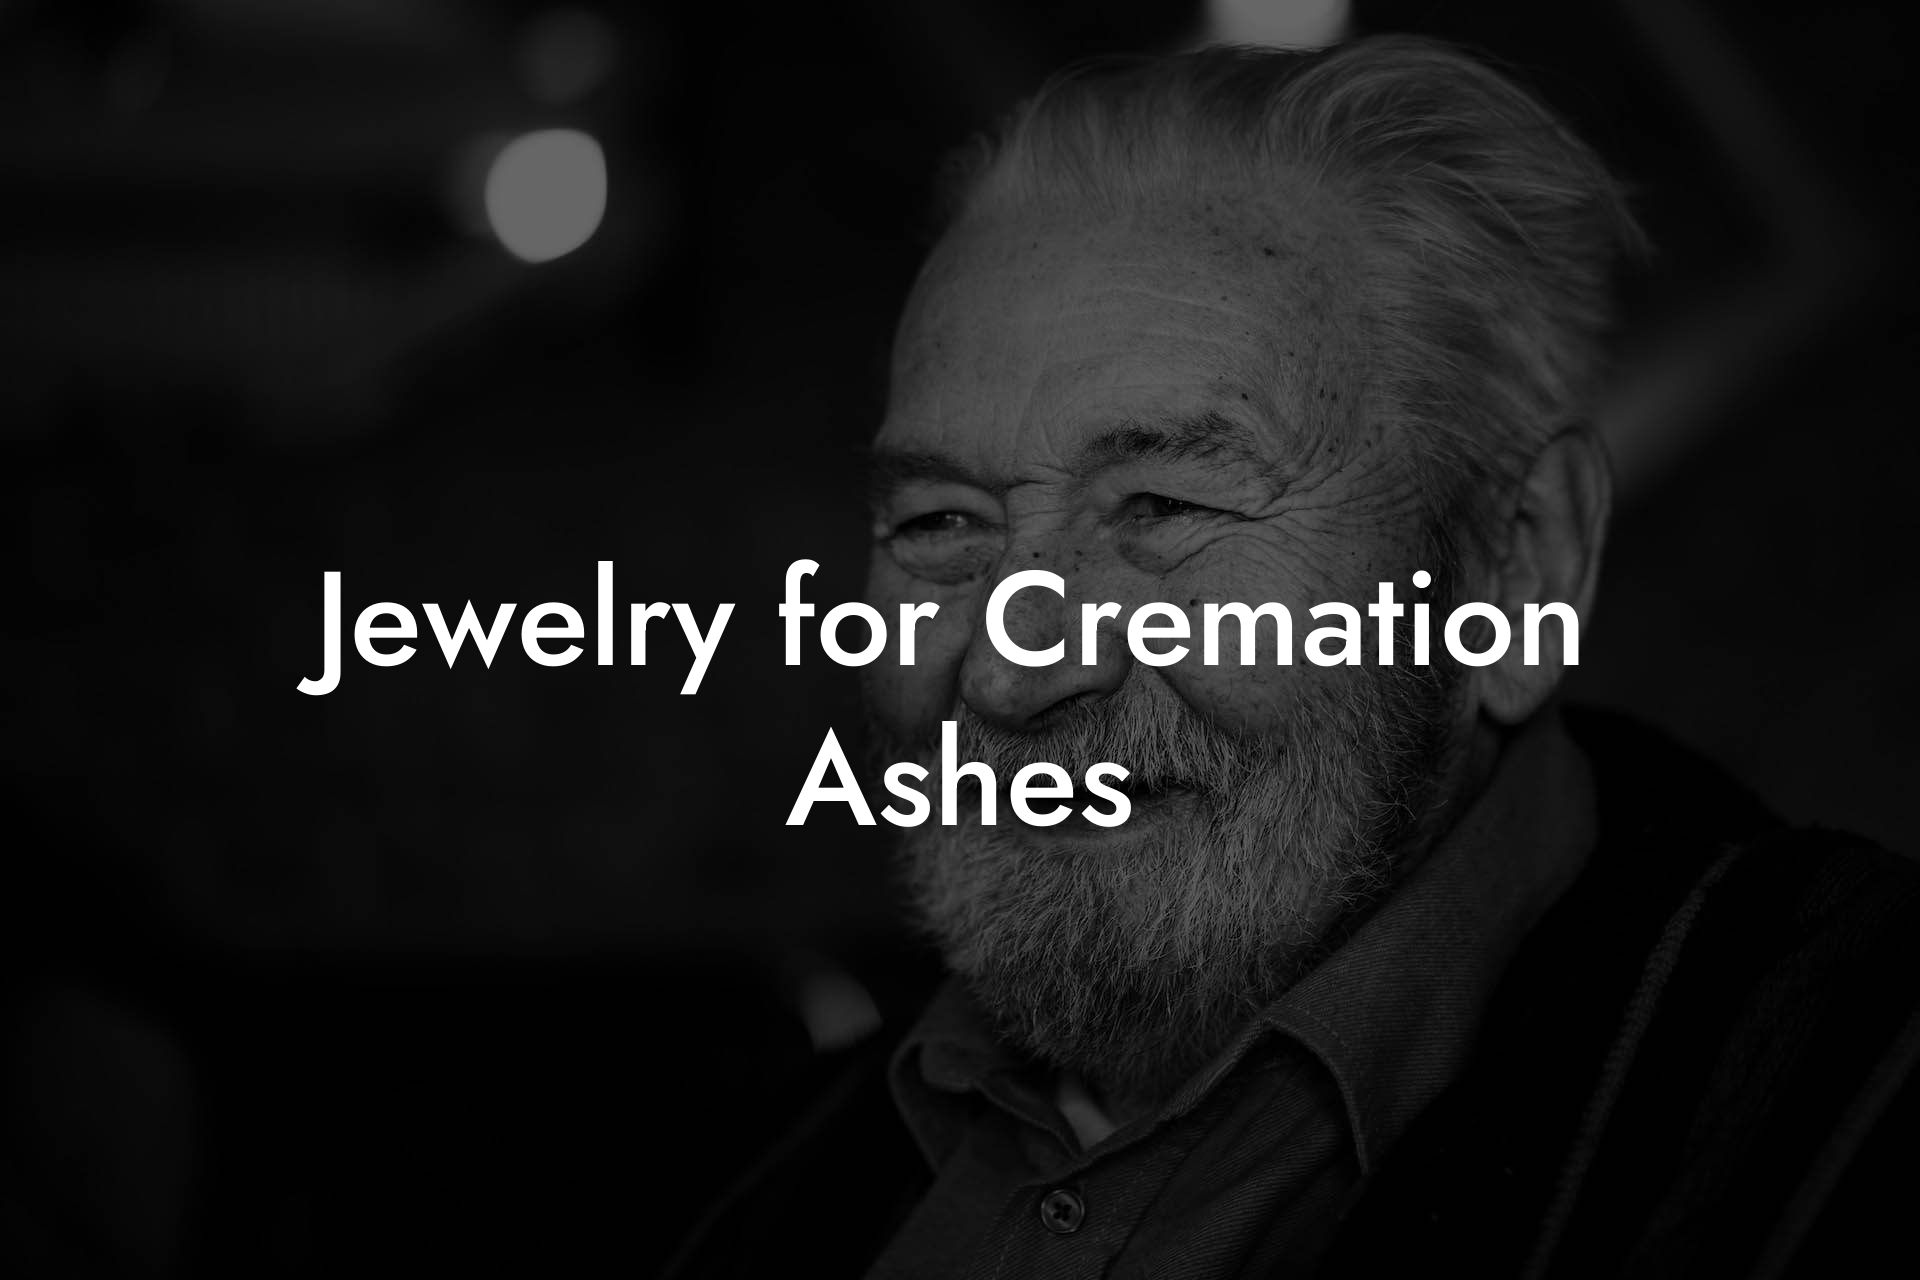 Jewelry for Cremation Ashes